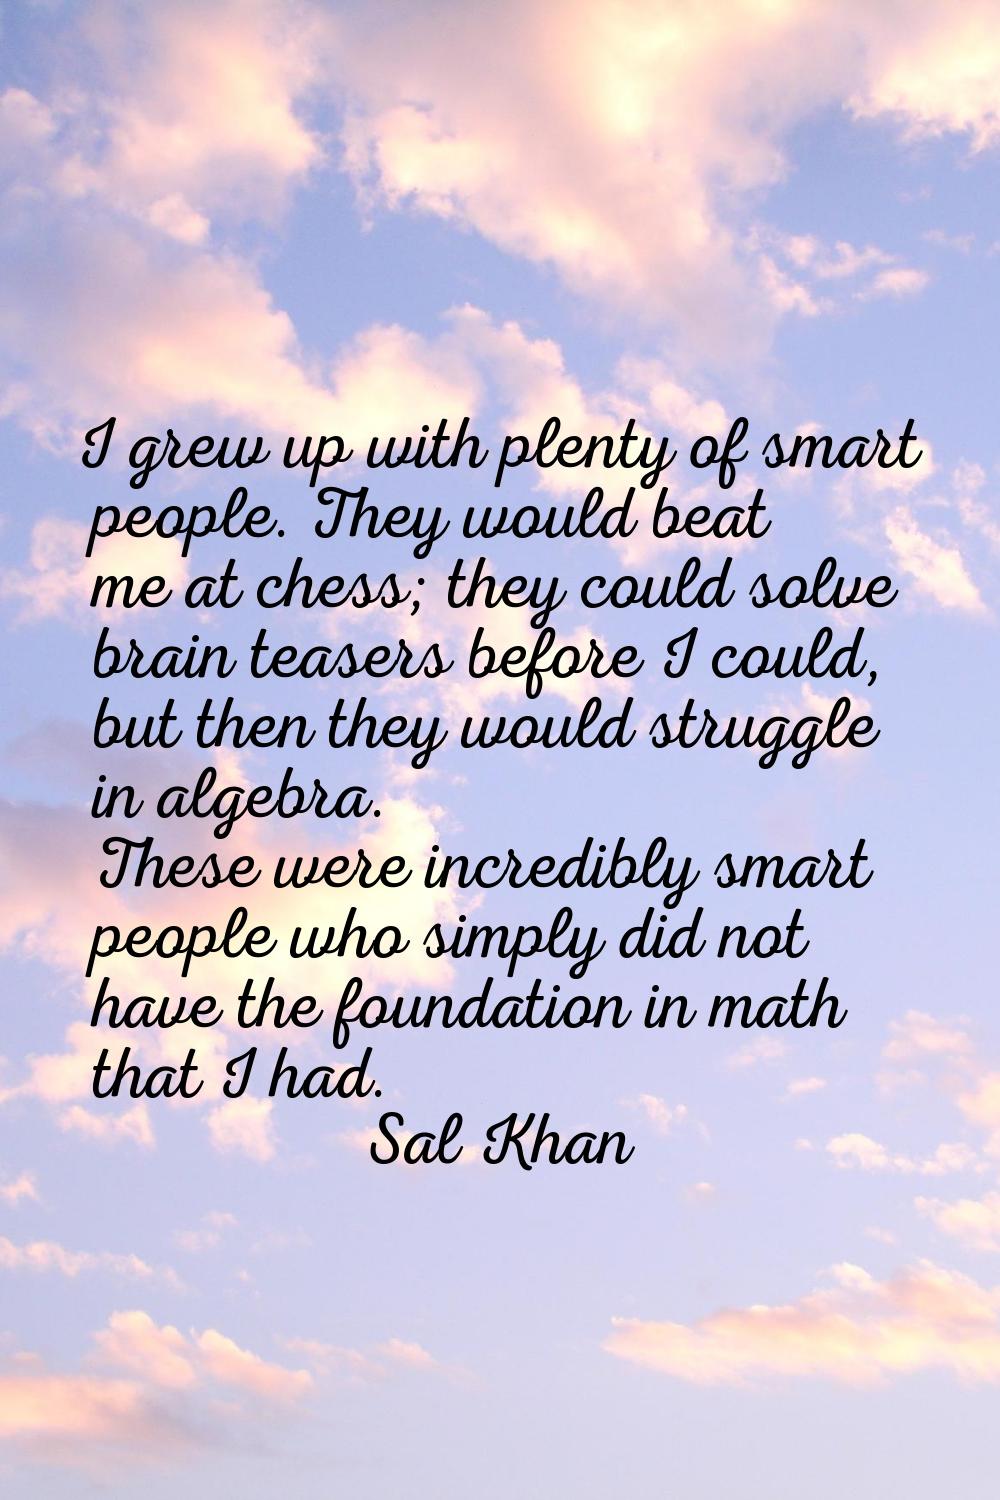 I grew up with plenty of smart people. They would beat me at chess; they could solve brain teasers 